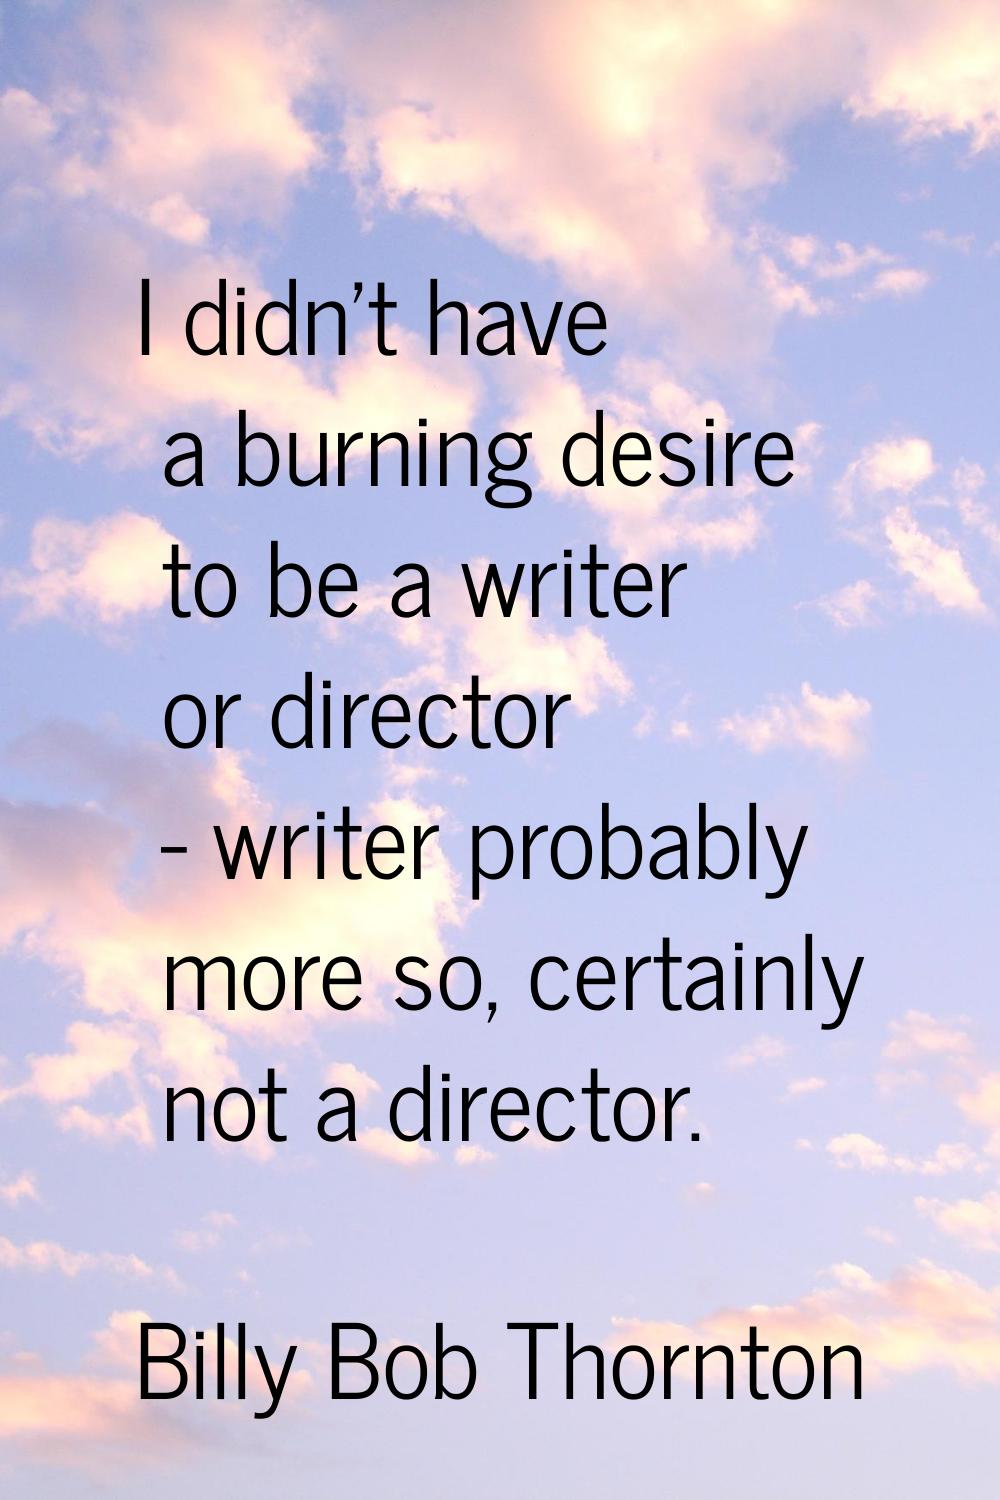 I didn't have a burning desire to be a writer or director - writer probably more so, certainly not 